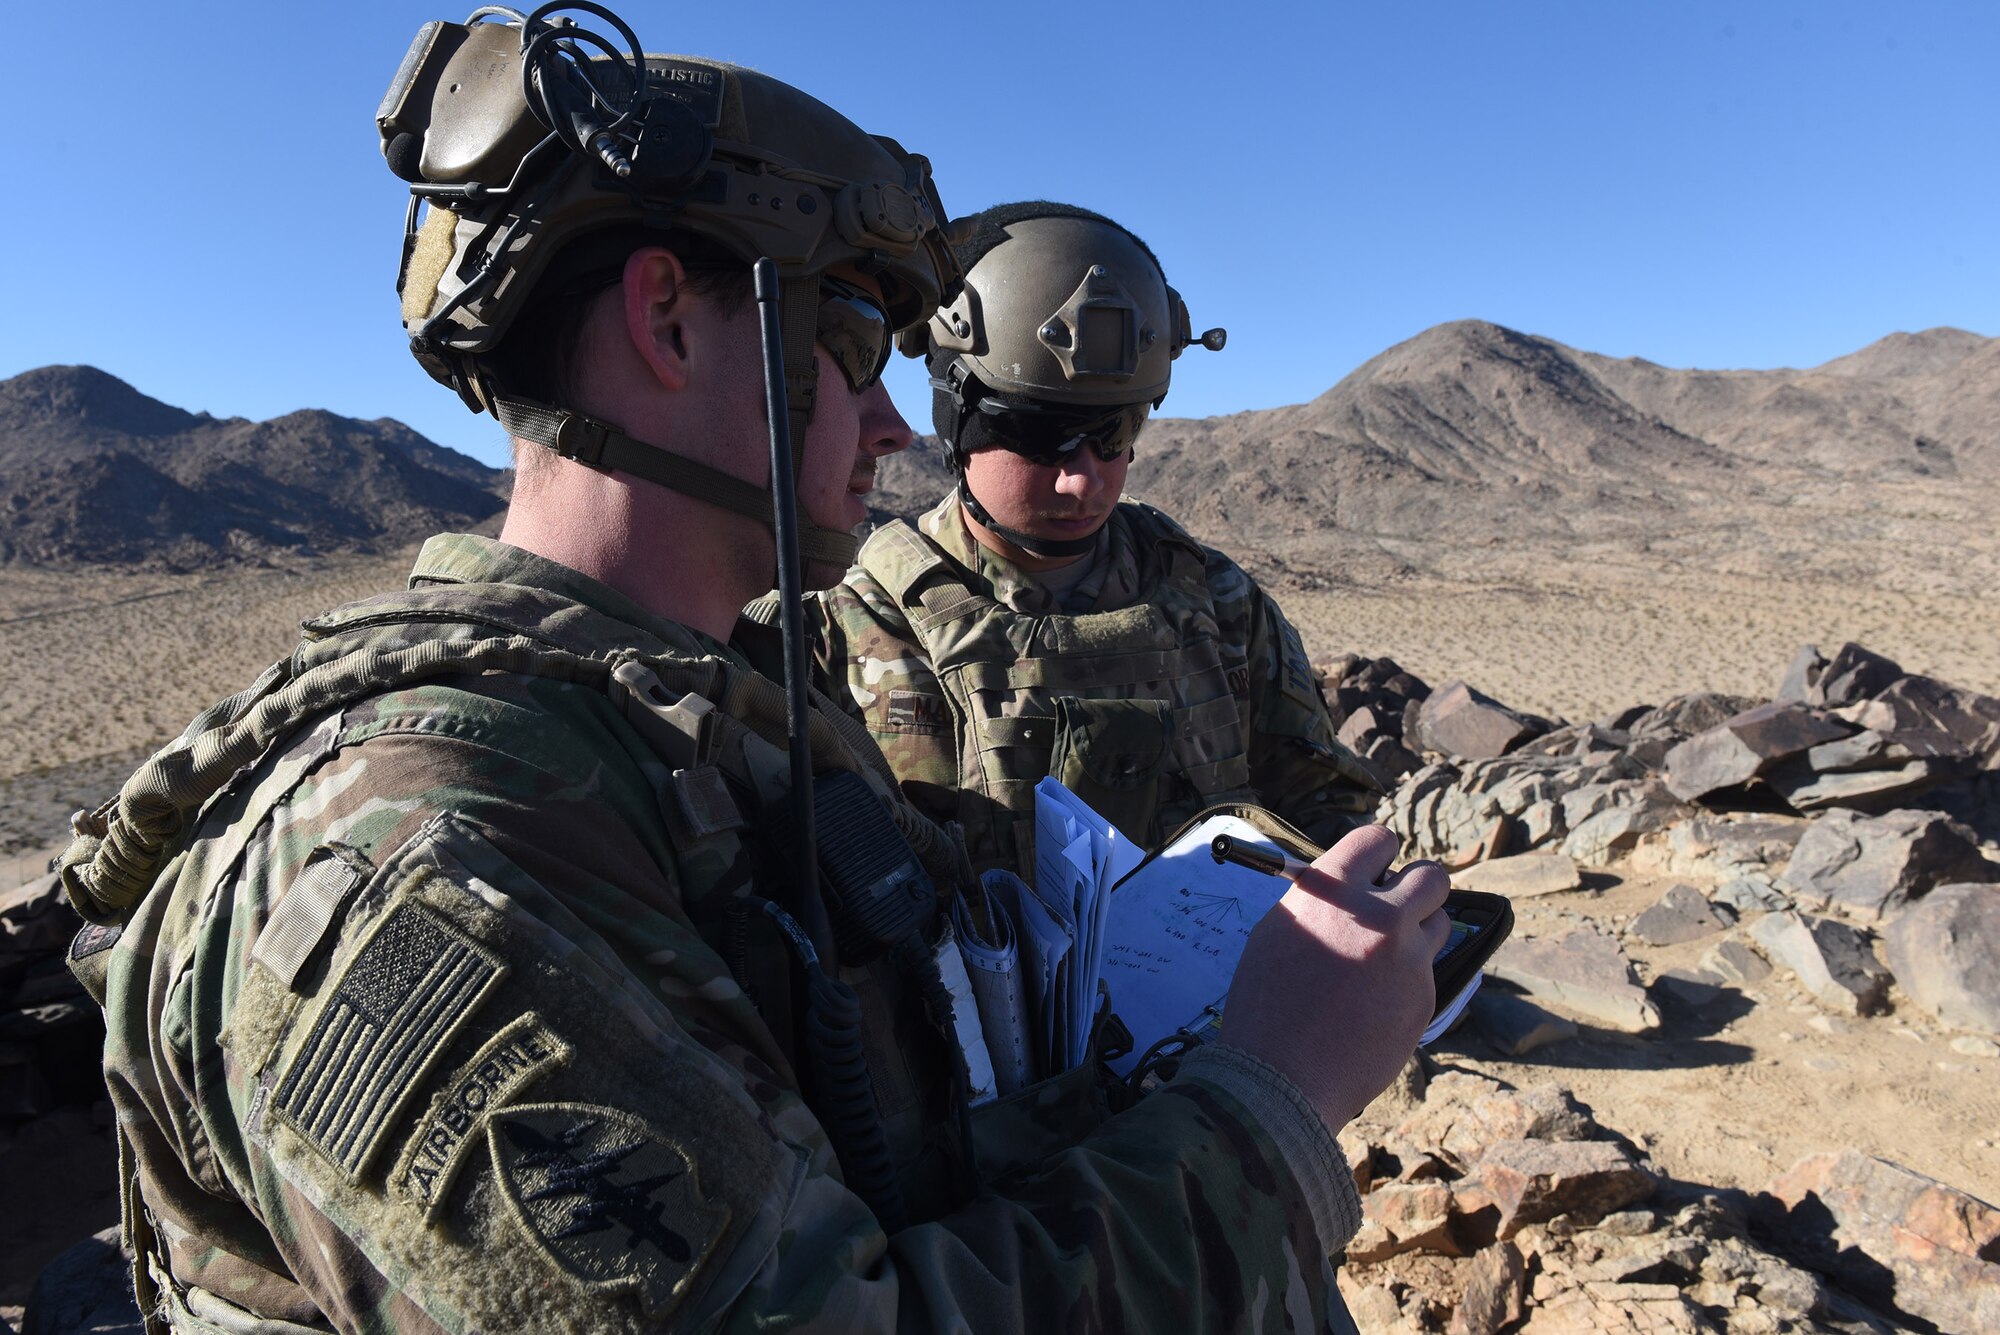 Senior Airman Nicholas Ward, left, and fellow 3d Air Support Operations Group Tactical Air Control Party specialist Airman 1st Class Jaron Maddox, records target threat areas to relay to pilots during a close-air support exercise as part of a Ft. Irwin, Calif. National Training Center rotation, Feb. 20, 2018. During the month-long rotation, 93d Air Ground Operations Wing units embedded with approximately 4,000 soldiers in the largest force-on-force live-fire exercise in the world. The 93d AGOW provided tactical air control party support to enhance interoperability for major combat operations downrange. (U.S. Air Force photo by Senior Airman Greg Nash)